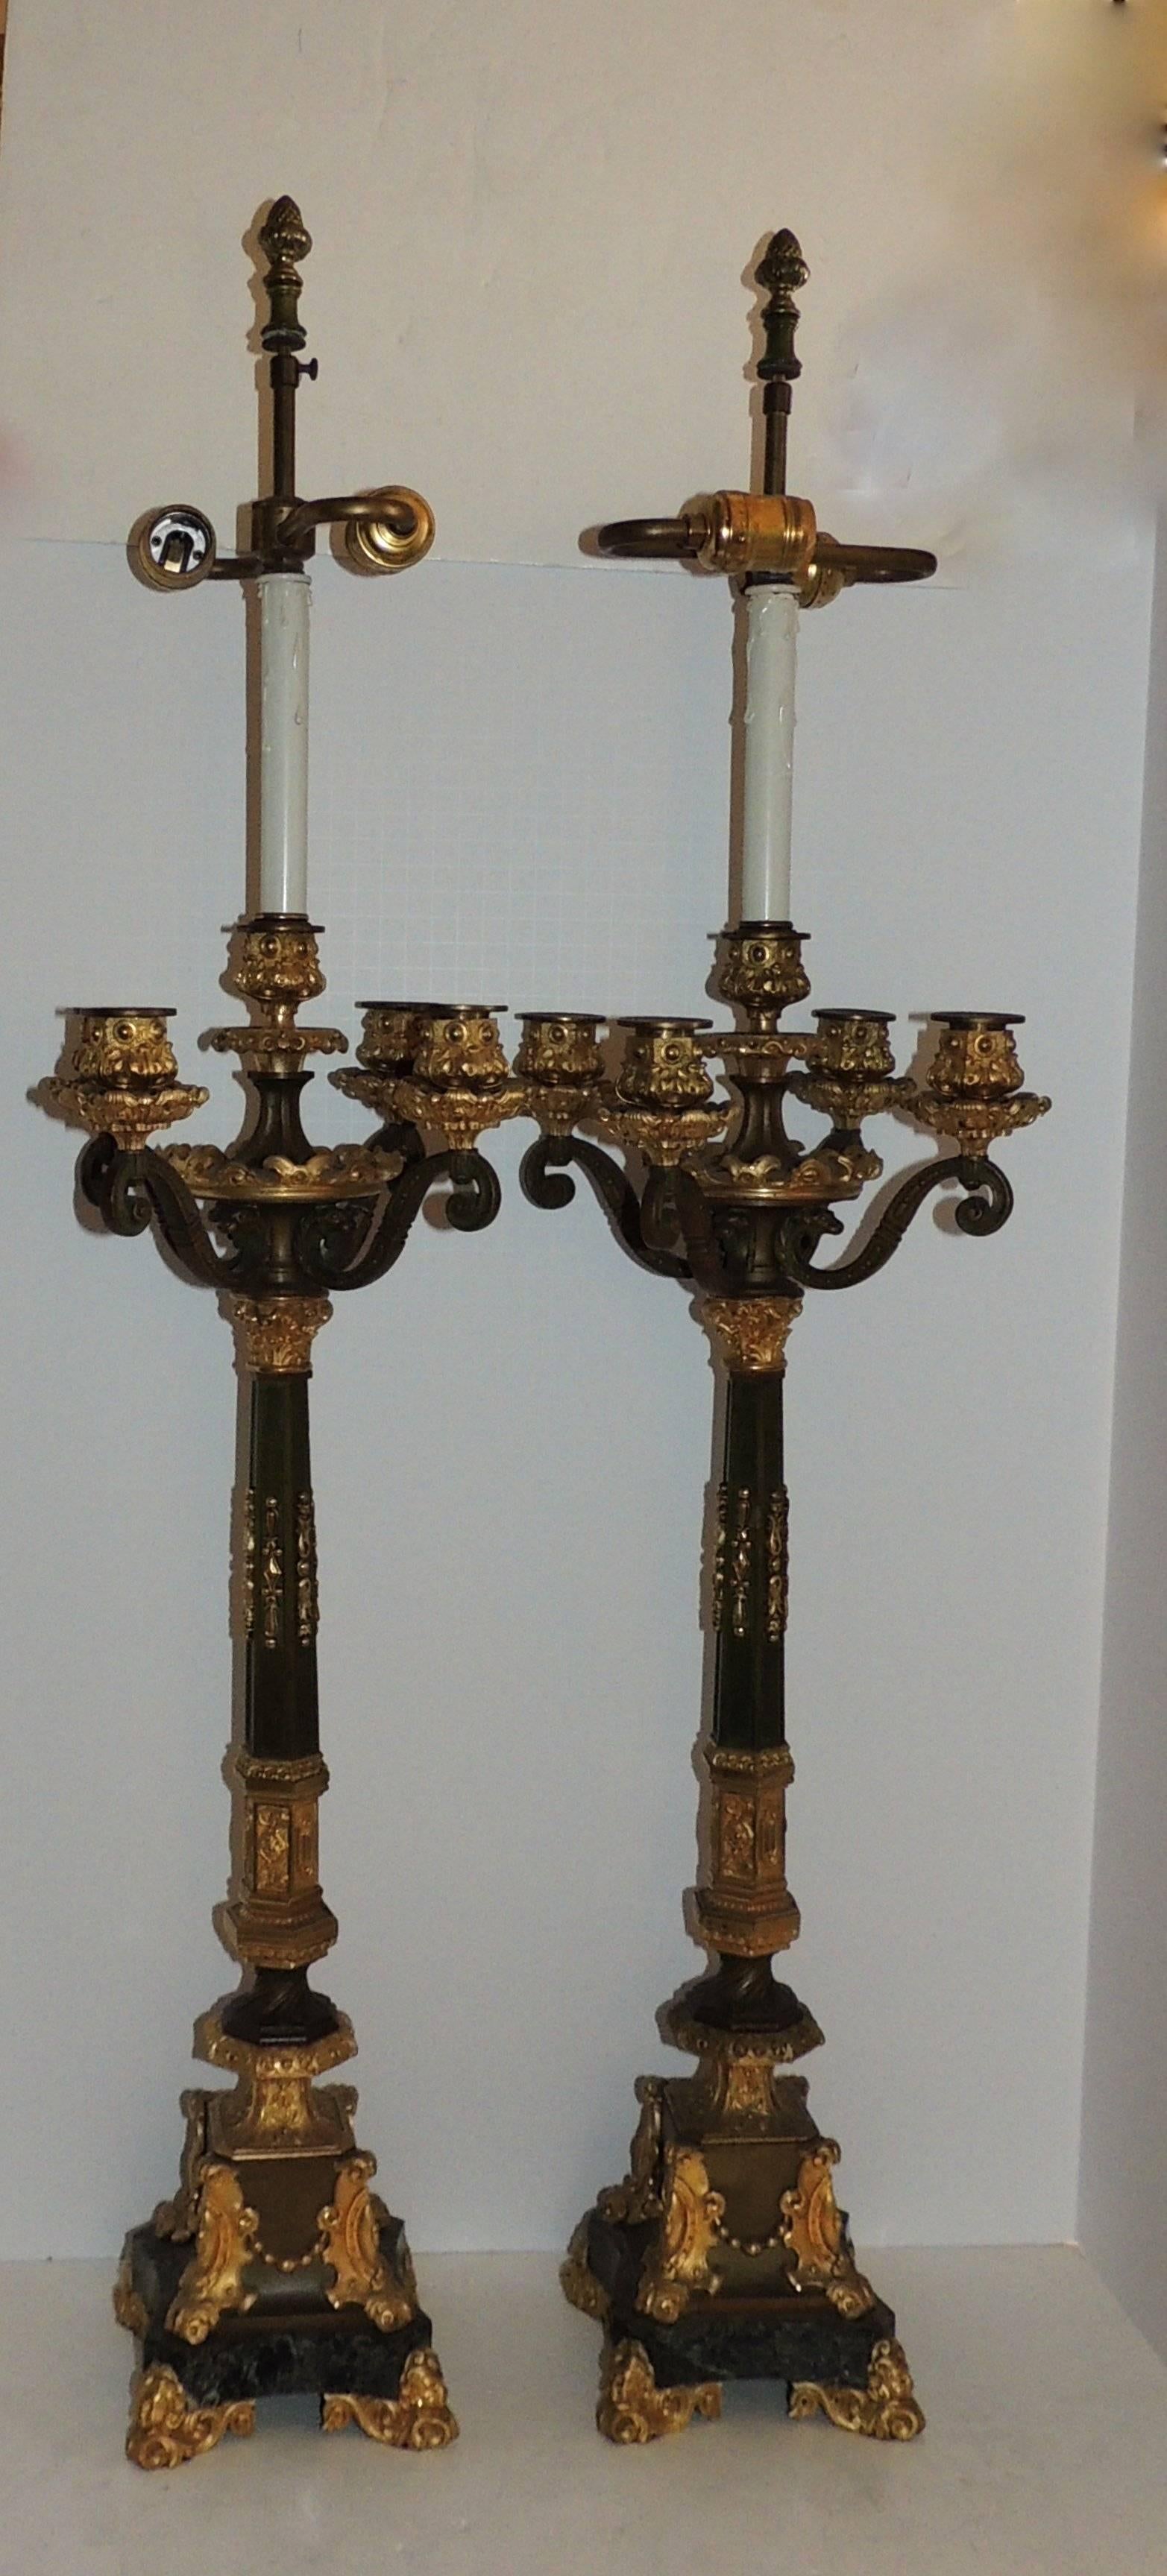 A beautiful large pair of 19th century French Empire gilt and patinated five-arm candelabra with two lights. Each of the four-arm candle cups are finished with lions faces, a have a very fine filigree draping on the marble pedestal bases on the four